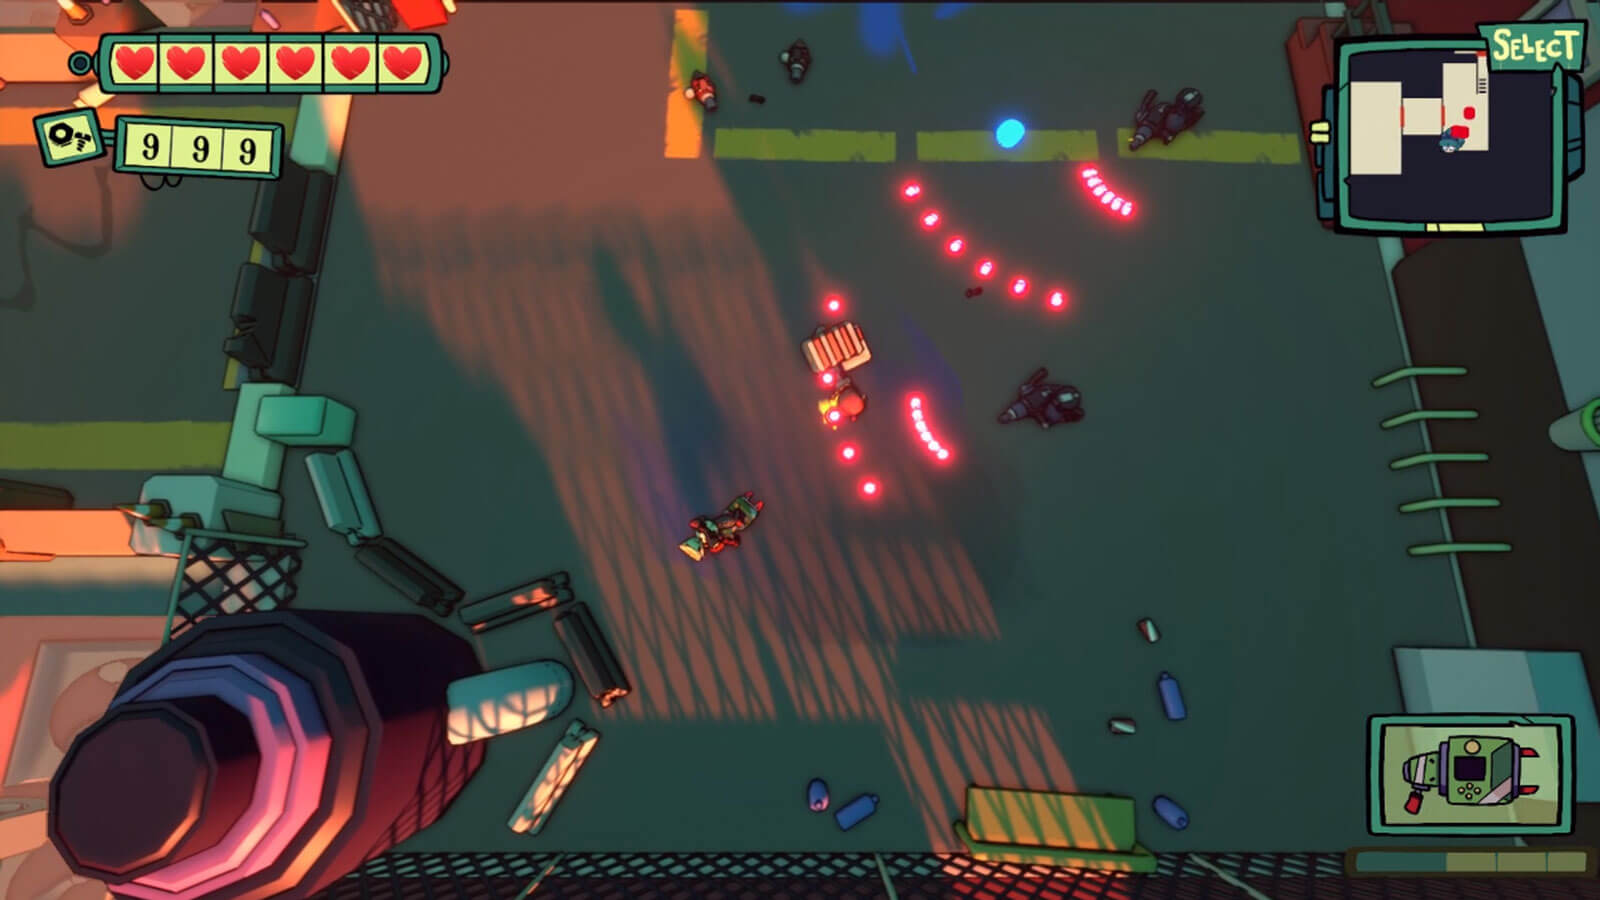 Player fires a spread shot of red bullets towards an enemy in a parking lot.